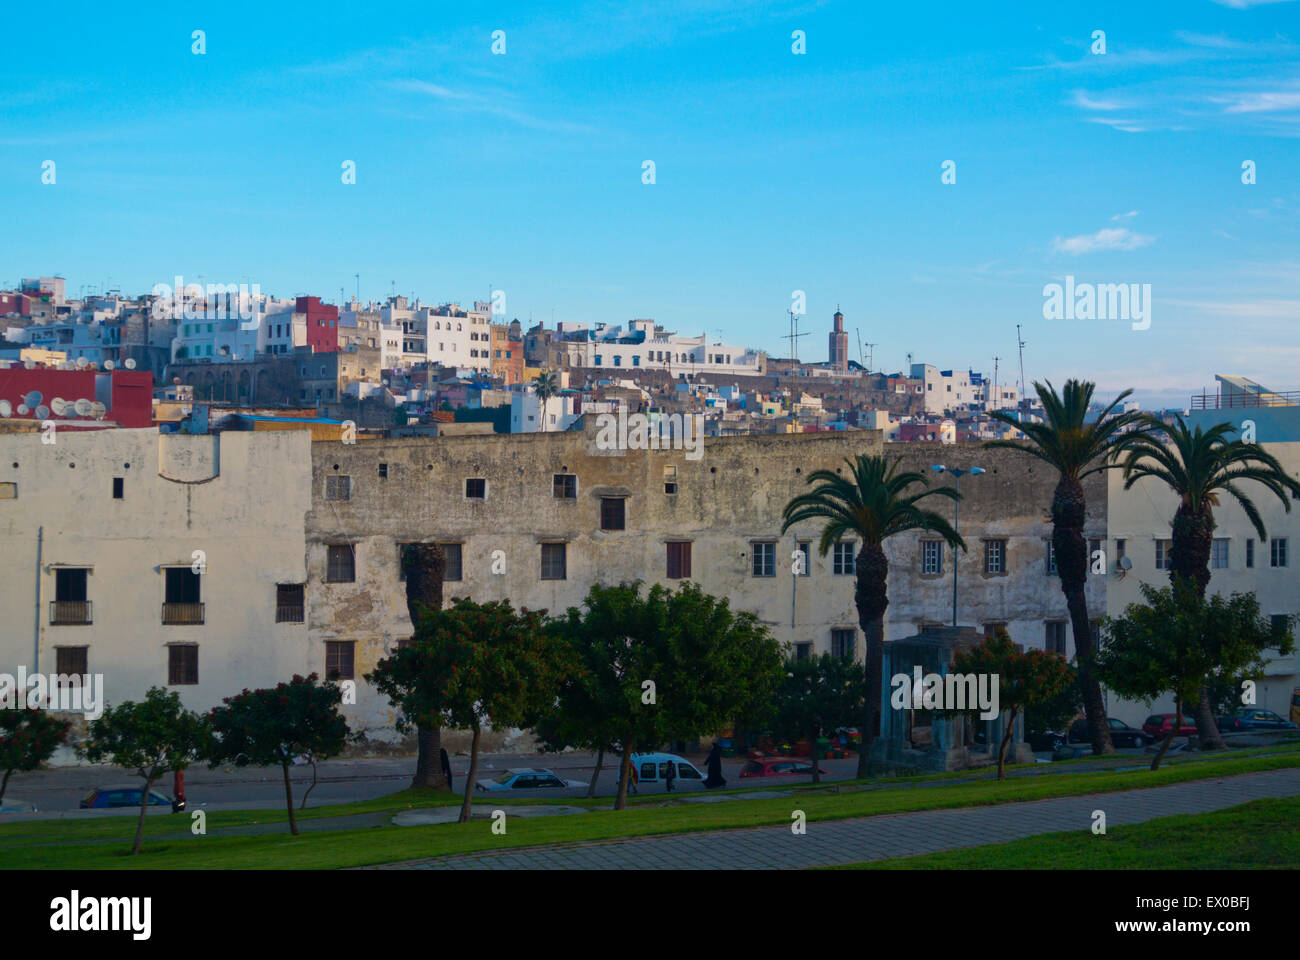 Mendoubia Gardens, Ville Nouvelle, new town, Tangier, Morocco, northern Africa Stock Photo